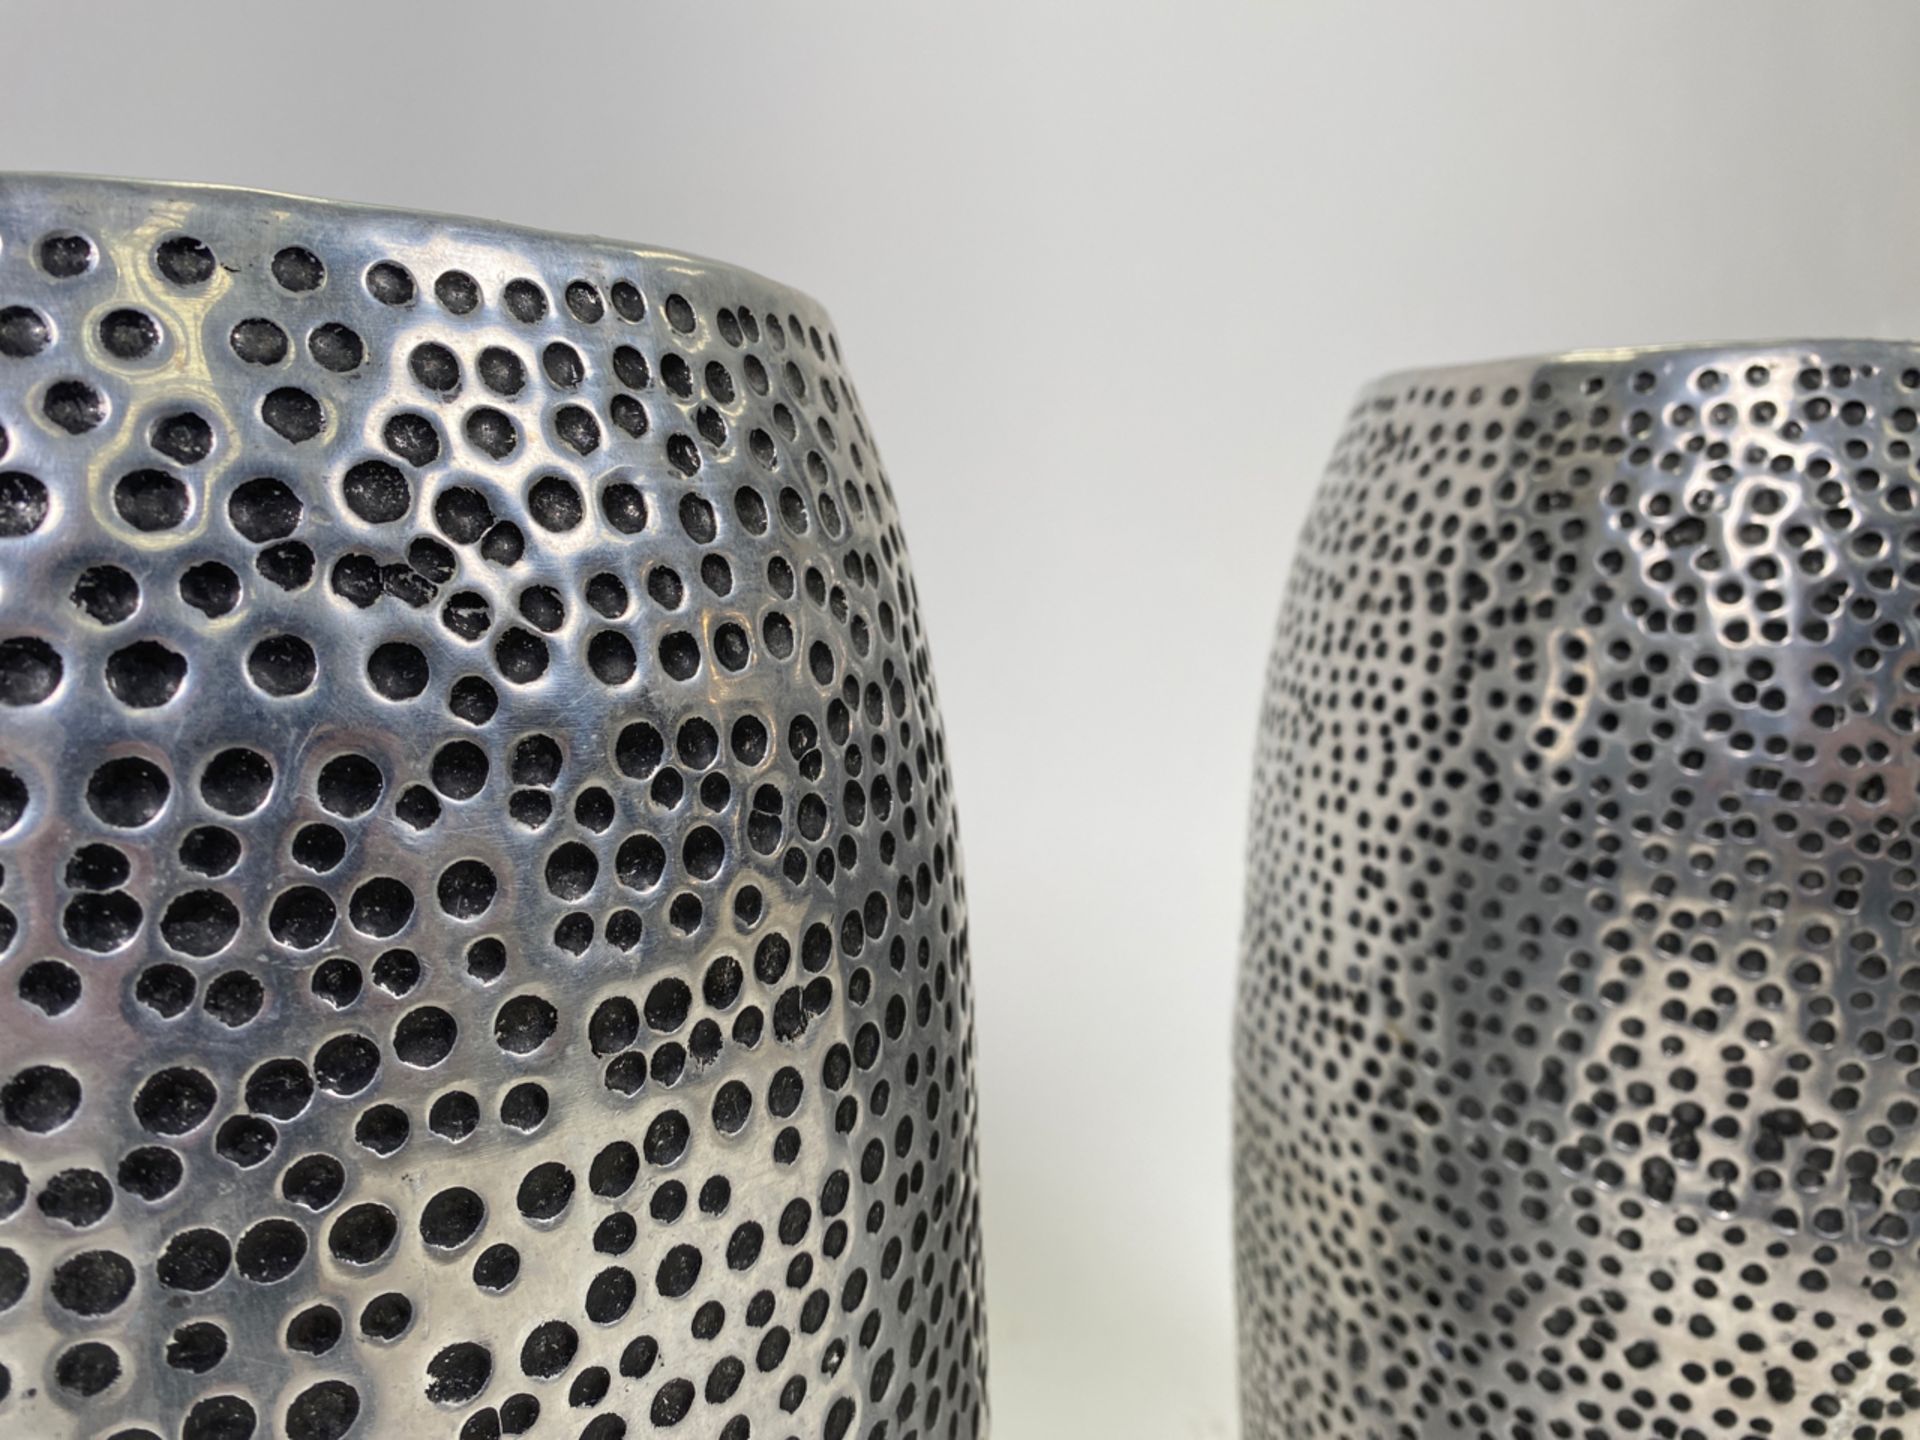 Pair of Speckled Plant Pots - Image 4 of 4